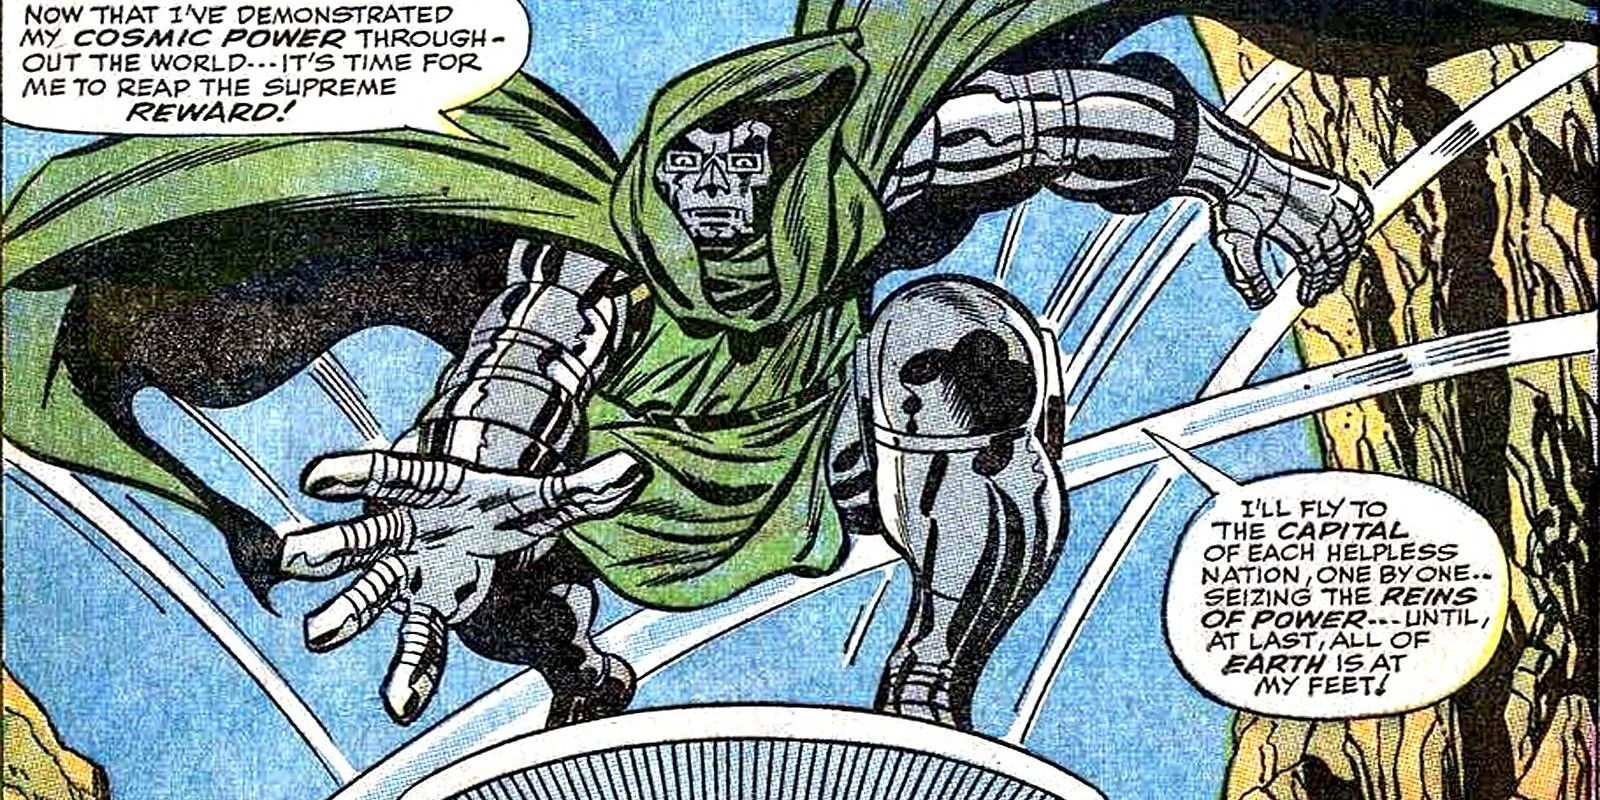 In Fantastic Four #60, Doctor Doom declares his plans for world domination while riding on the Silver Surfer's board